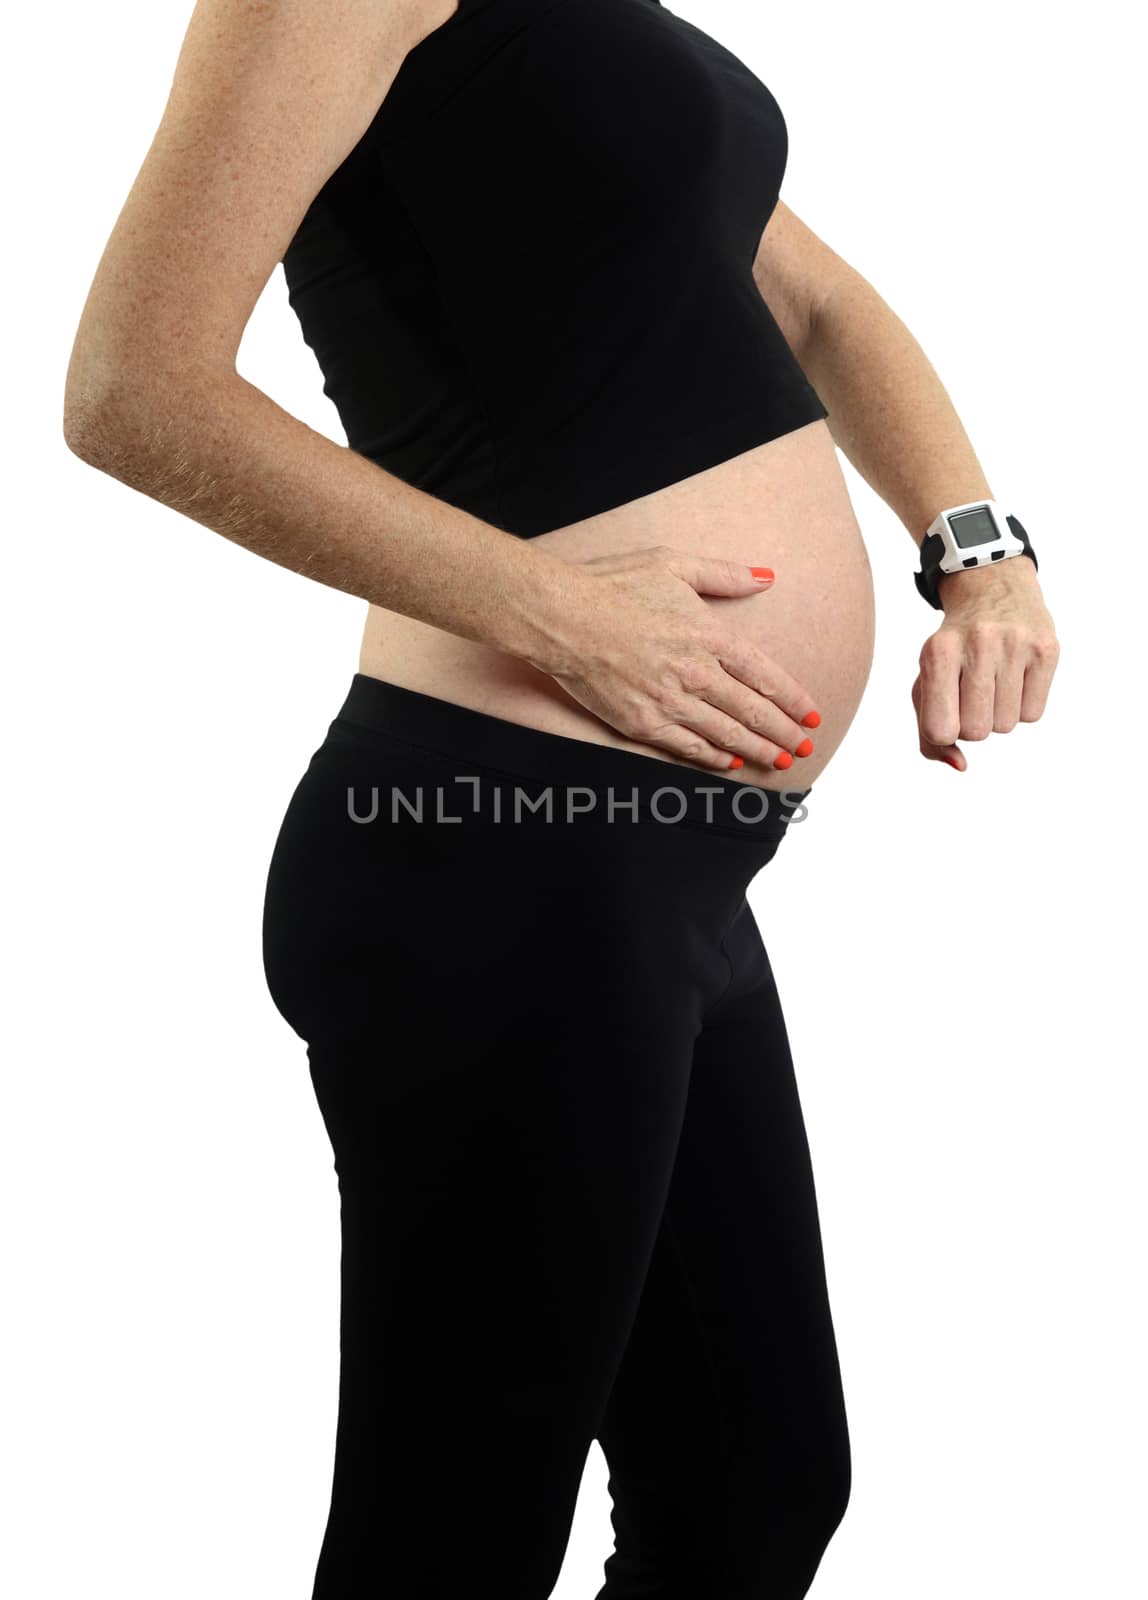 timing contractions during pregnancy and labor by ftlaudgirl